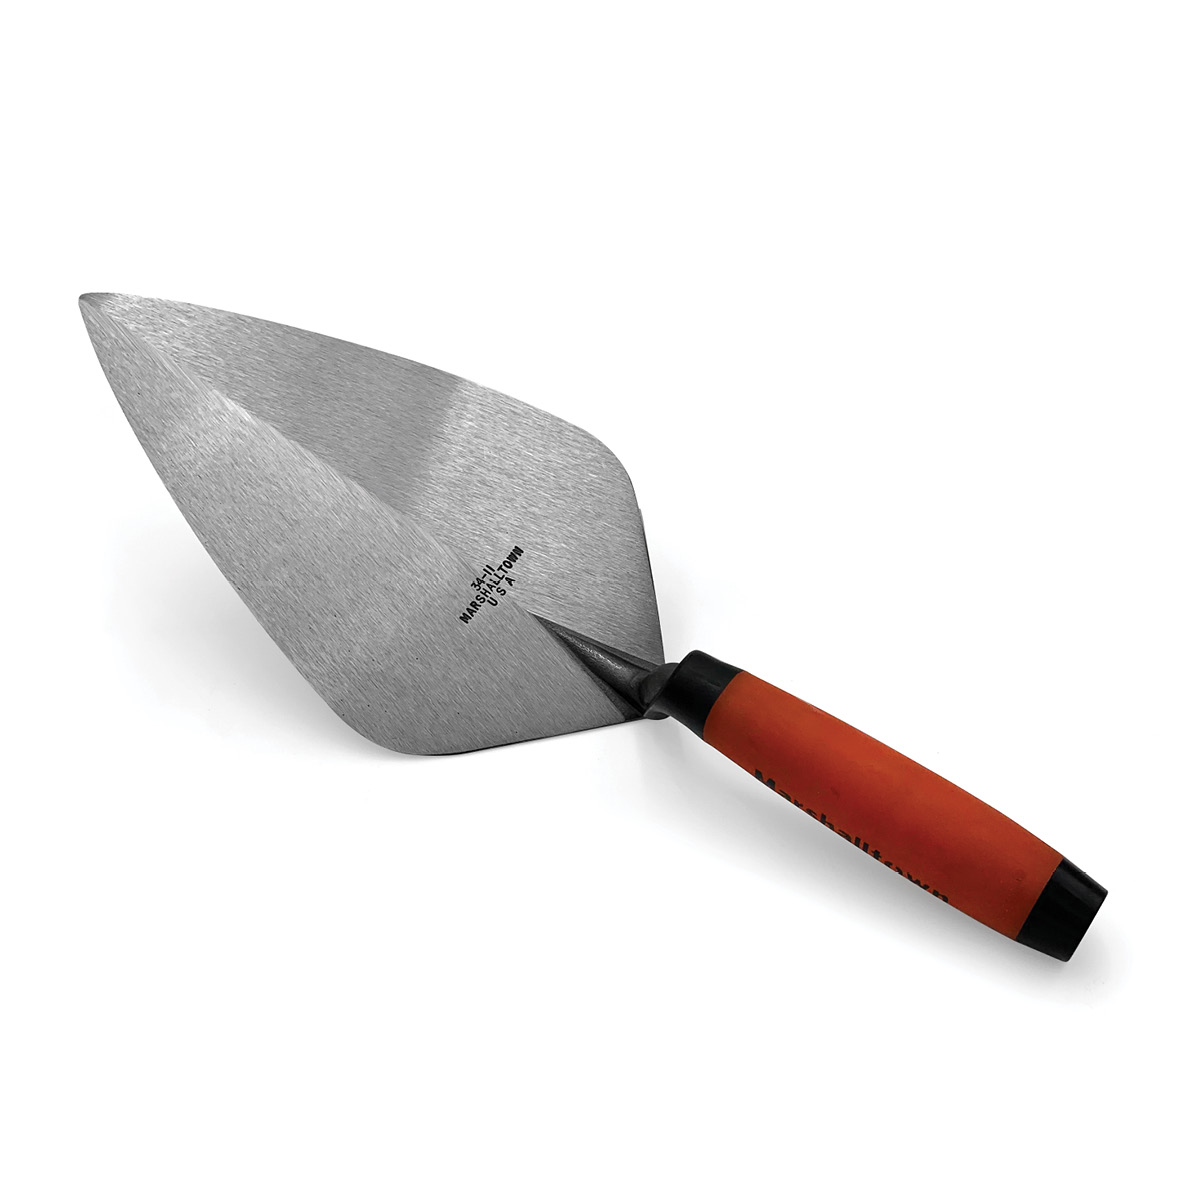 Wide Heel Marshalltown Brick Trowels for masonry professionals, available in the United Kingdom Via Speedcrete online shop and depots. 